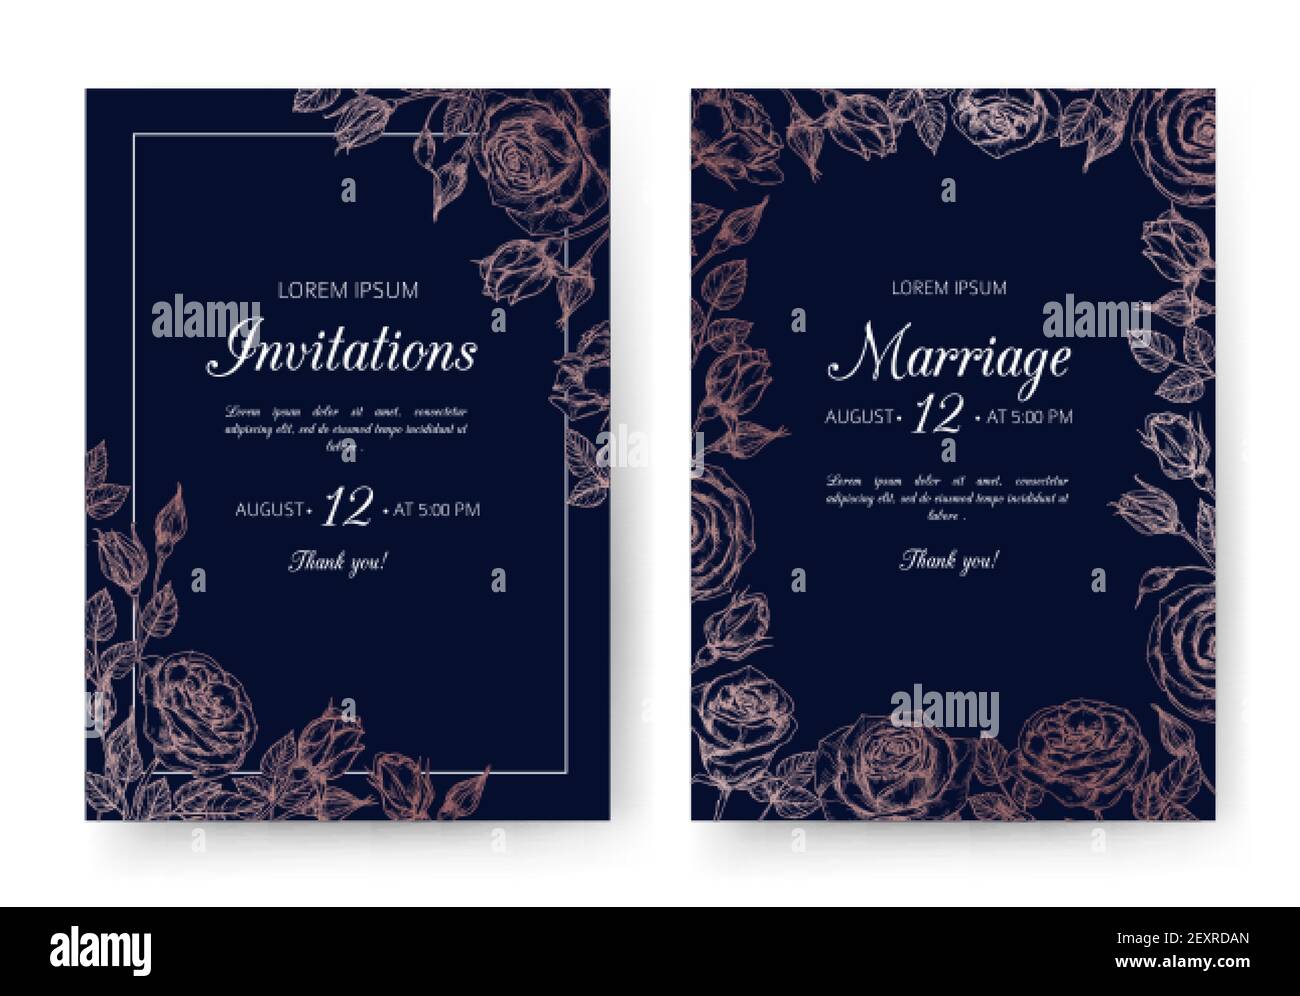 Wedding invitation. Floral wedding cards with rose frame in victorian engraving style. Vintage vector flyers. Wedding invitation poster in black colored, border floral frame illustration Stock Vector